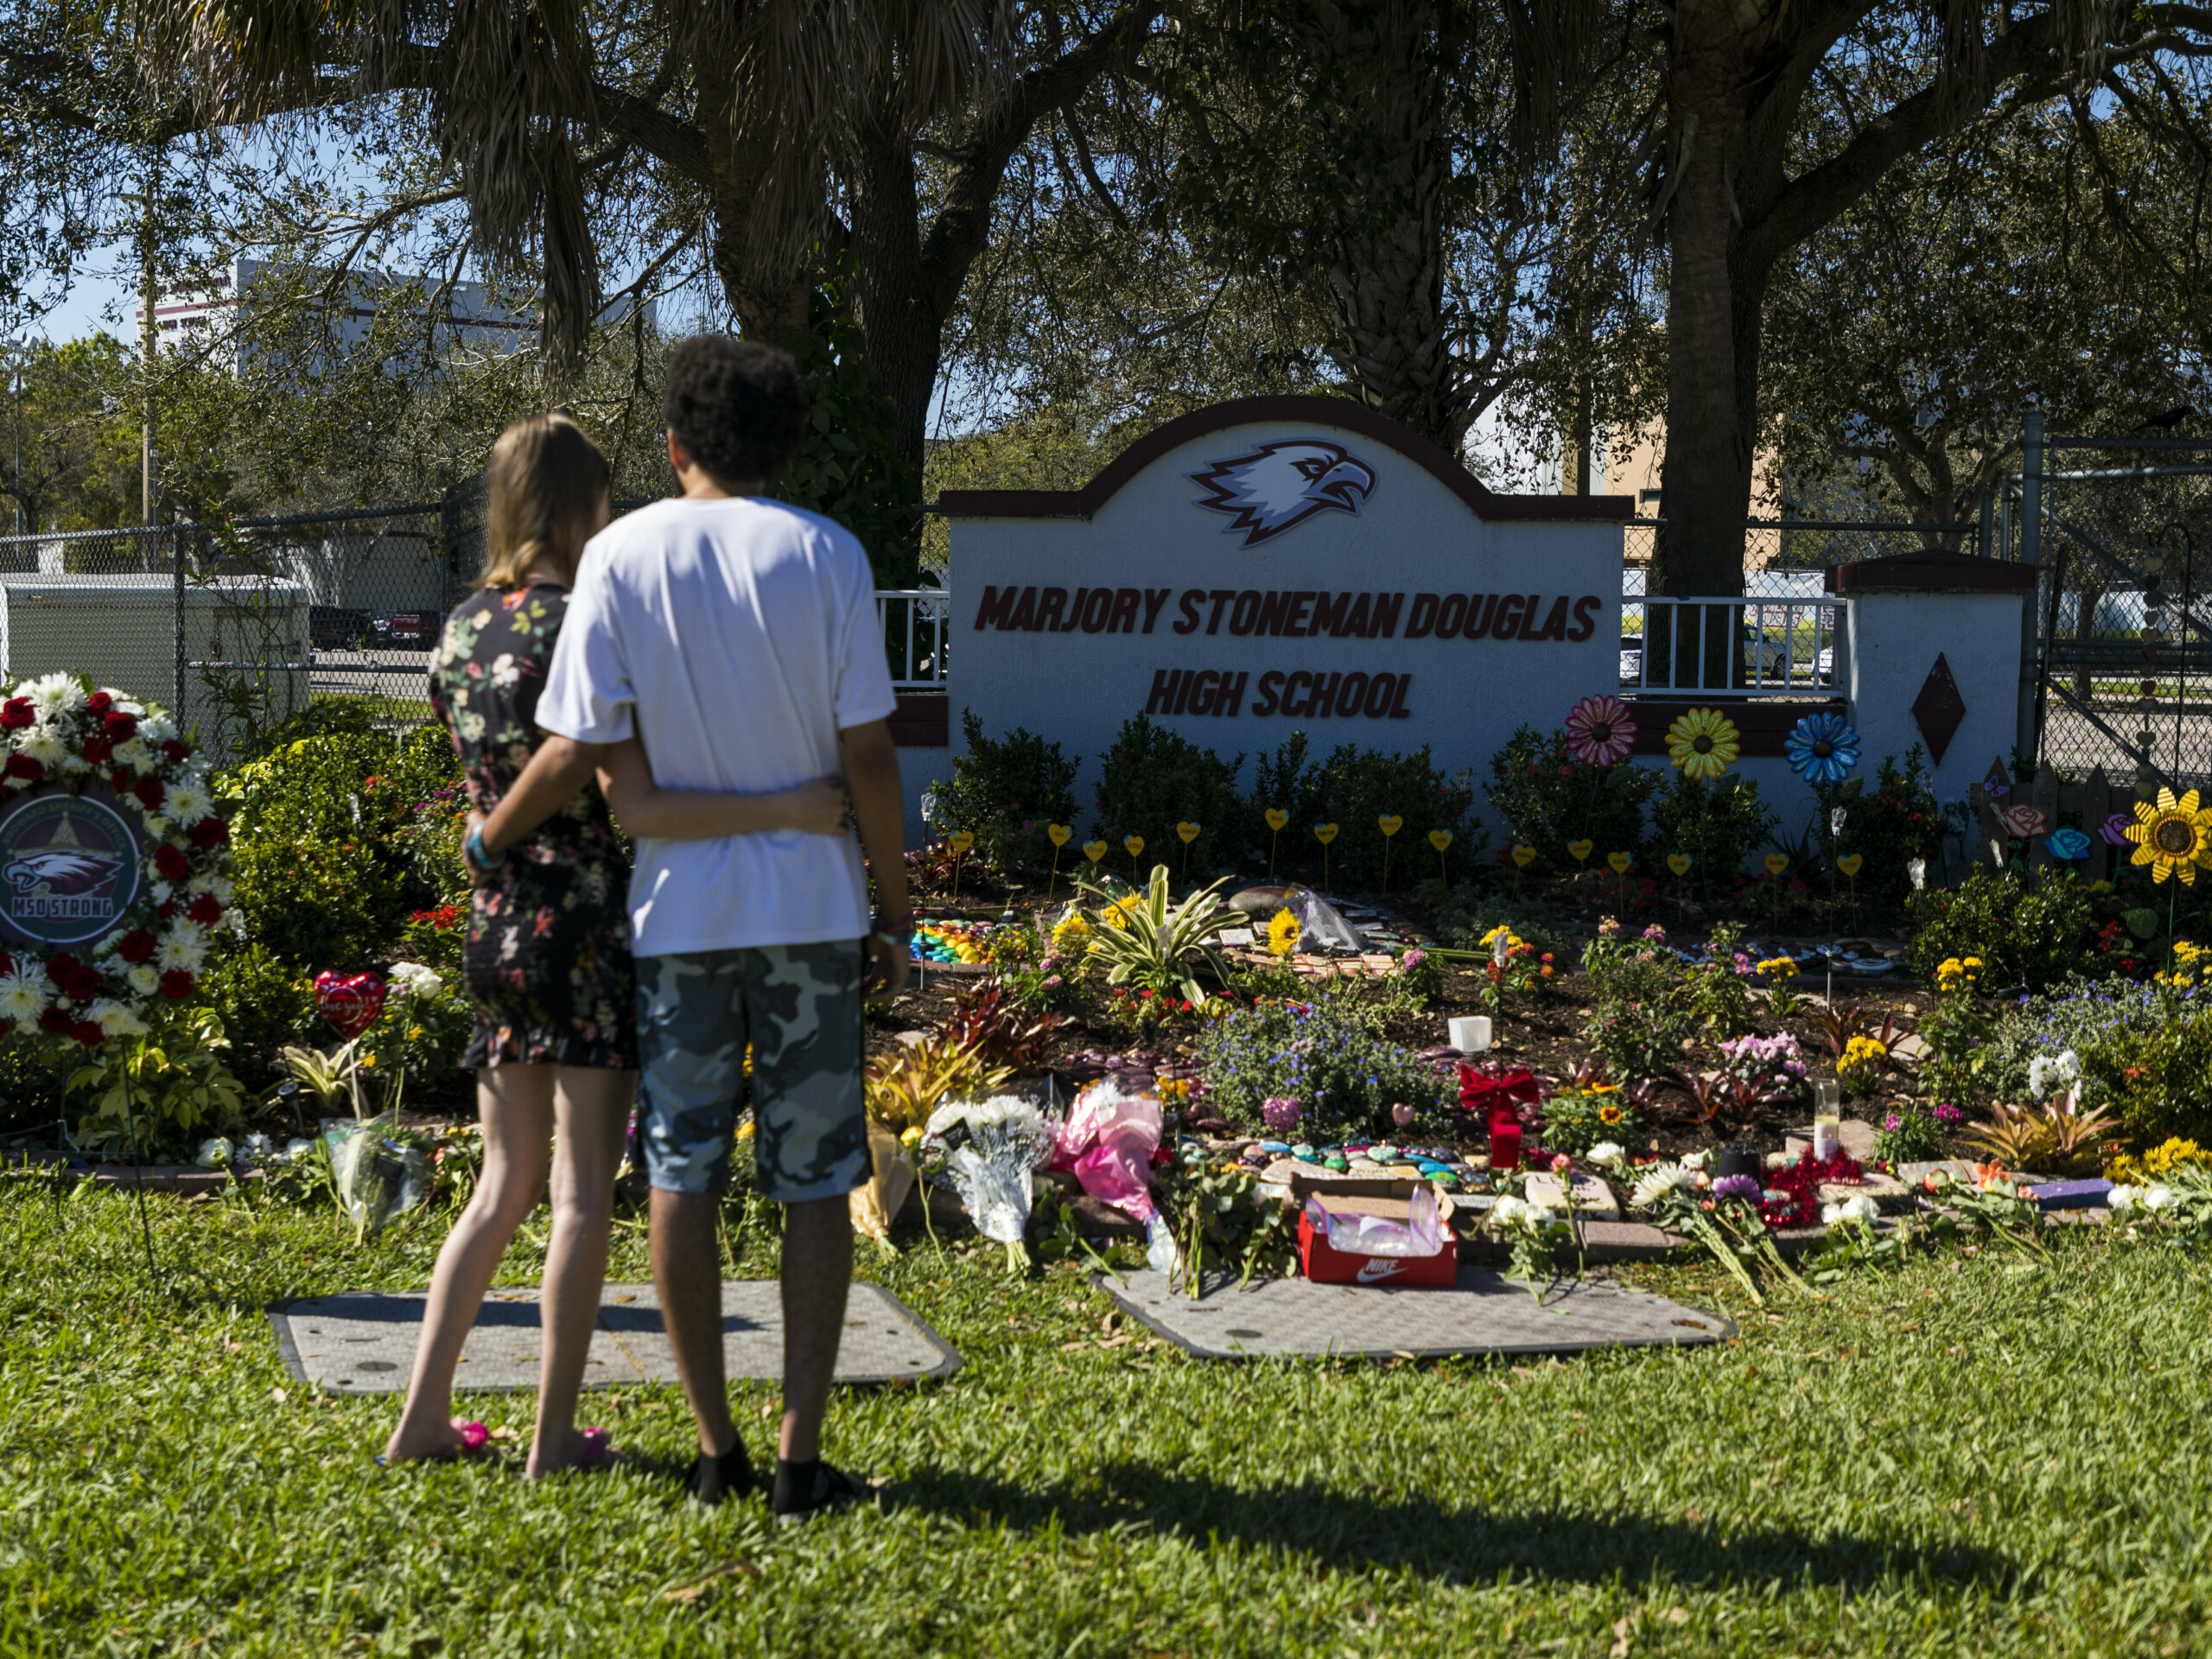 Harris plans to visit the Parkland school where 14 kids were killed in 2018